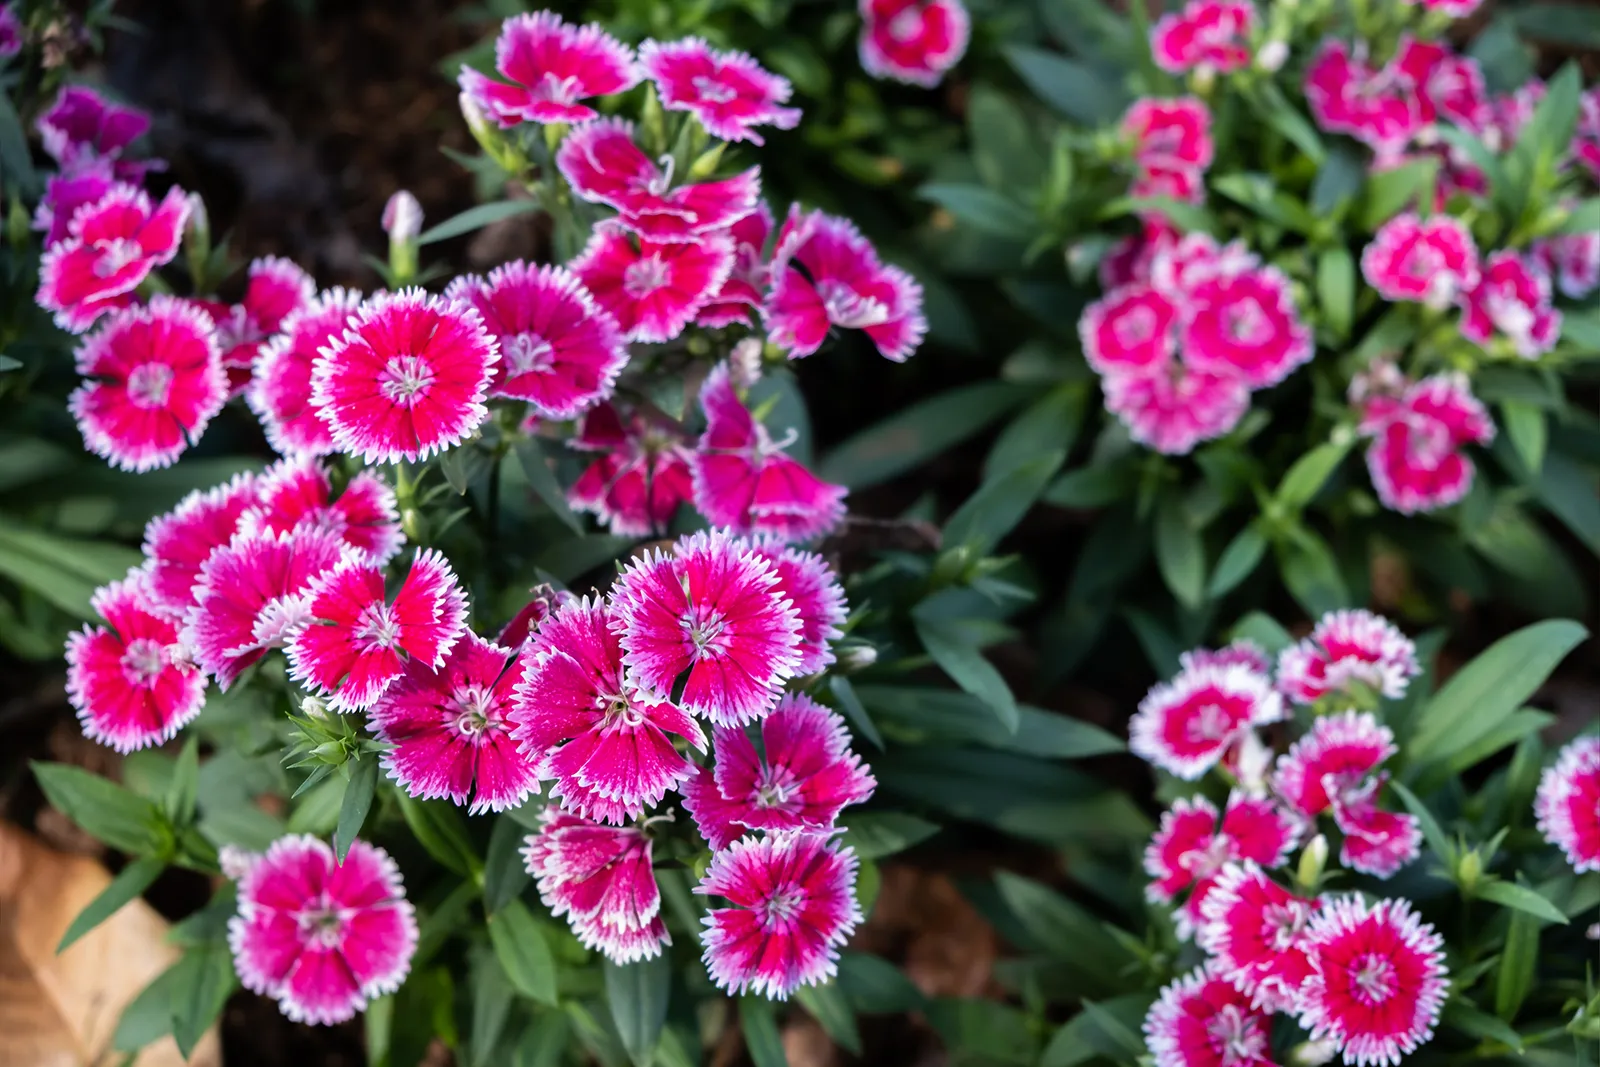 8 Mind-blowing Facts About Carnation - Facts.net